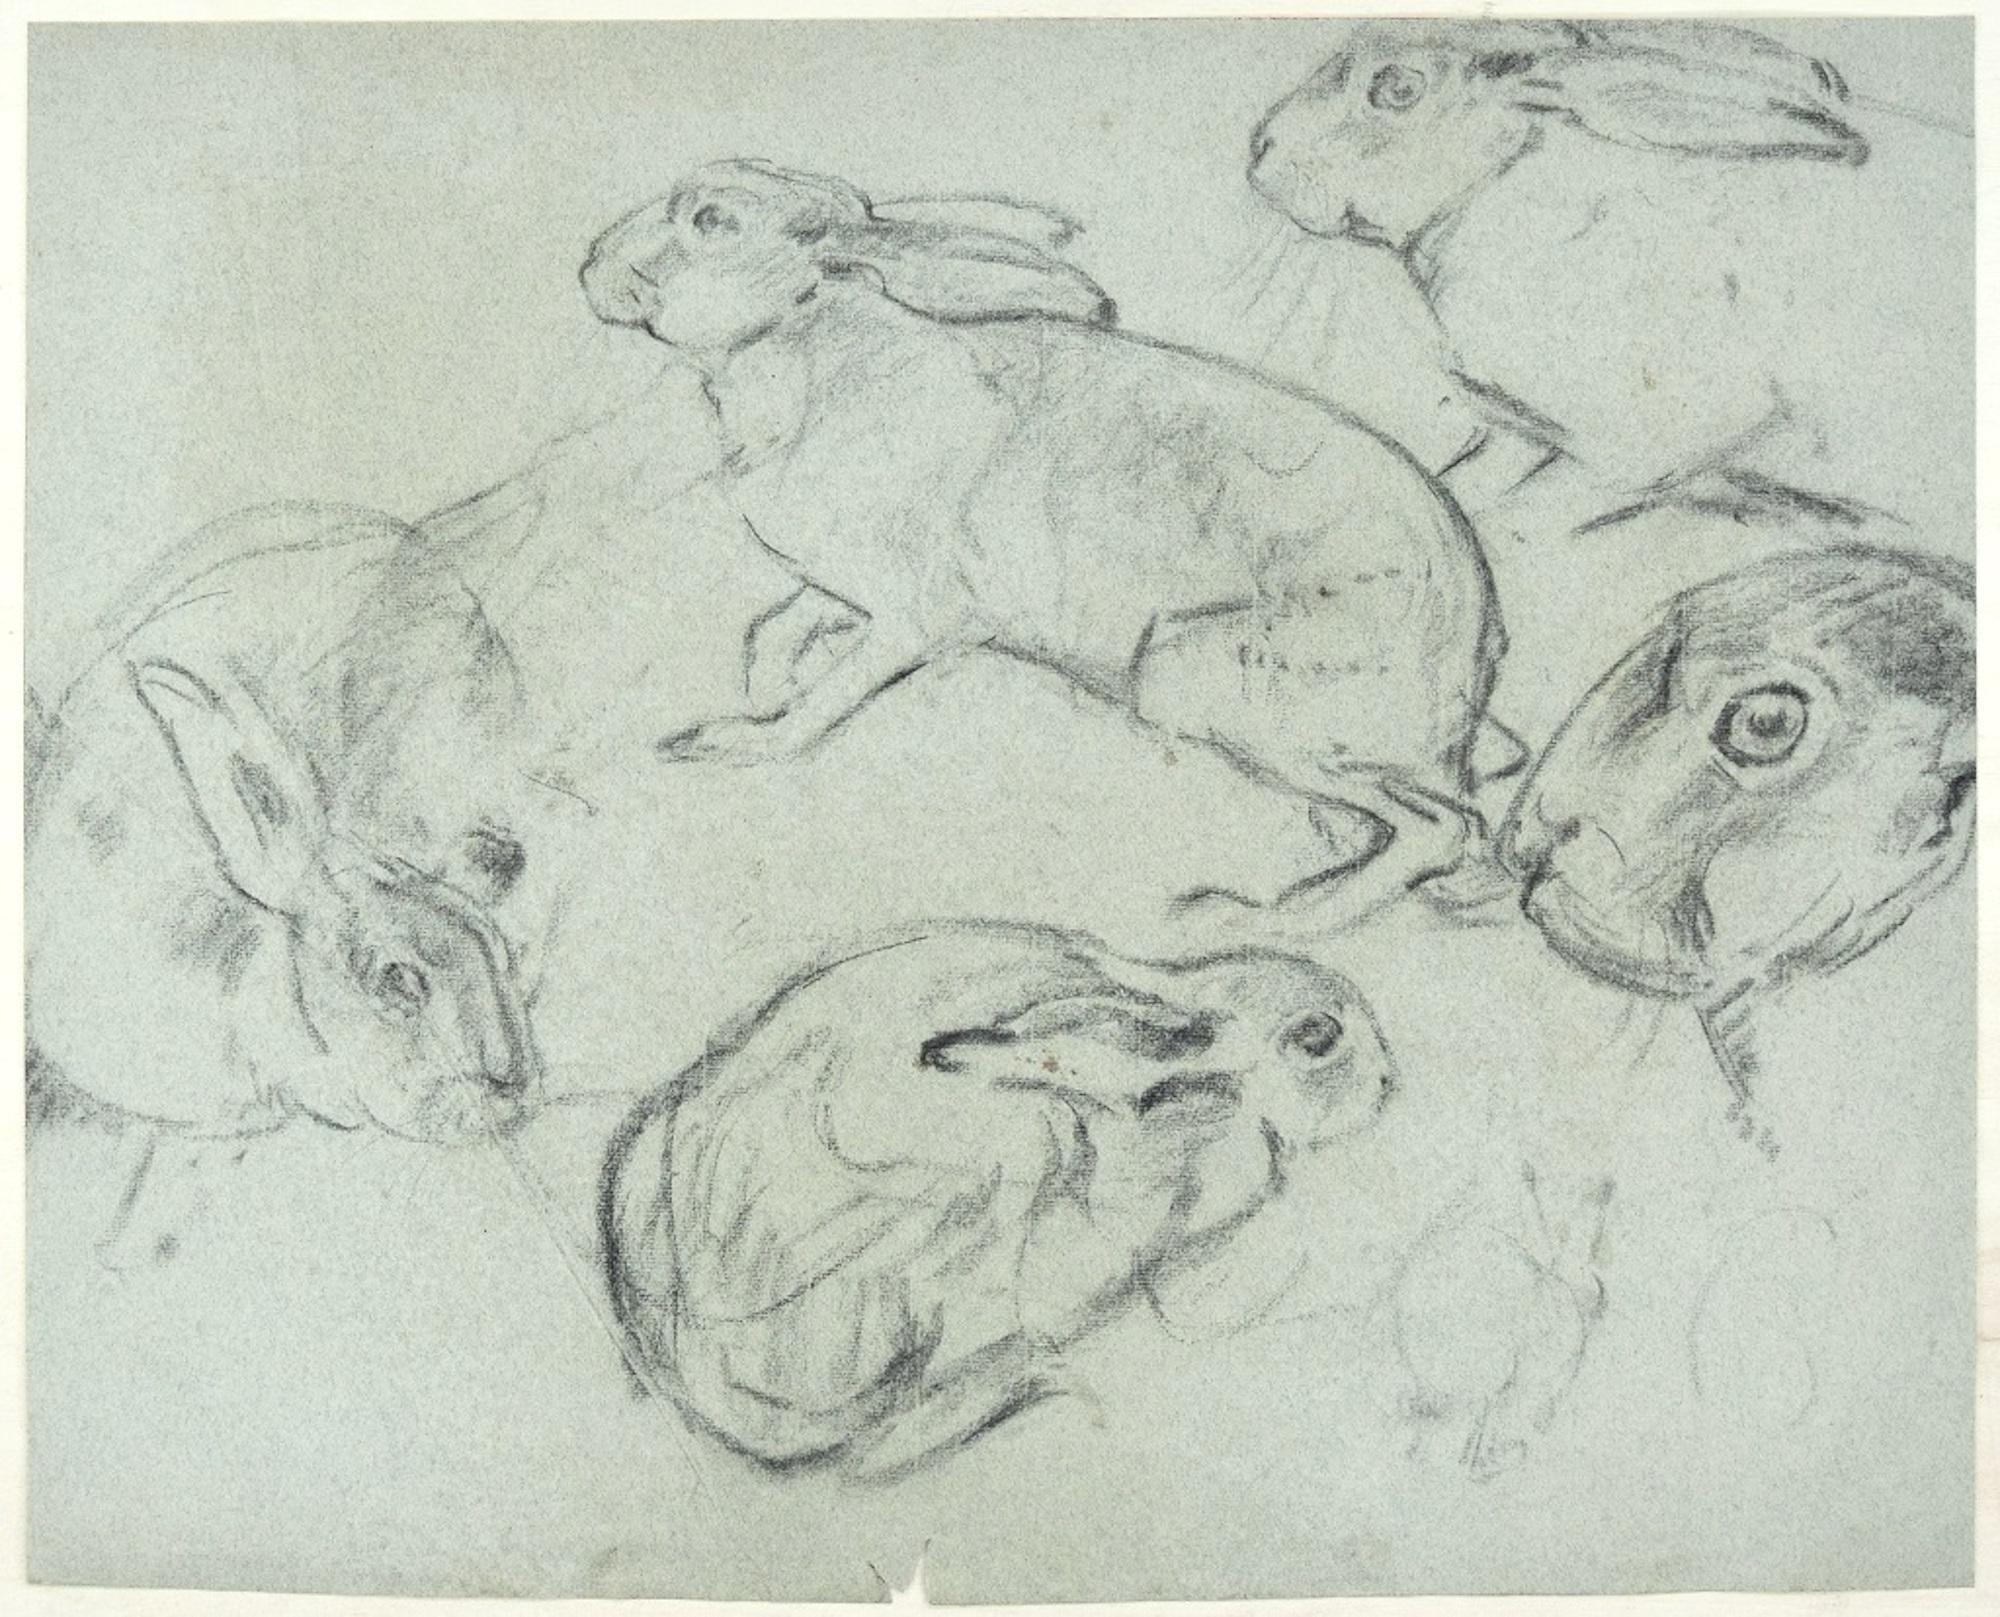 Crouched Lioness and Rabbits - Original Pencil Drawing by Willy Lorenz - 1971 - Art by Wilhelm Lorenz